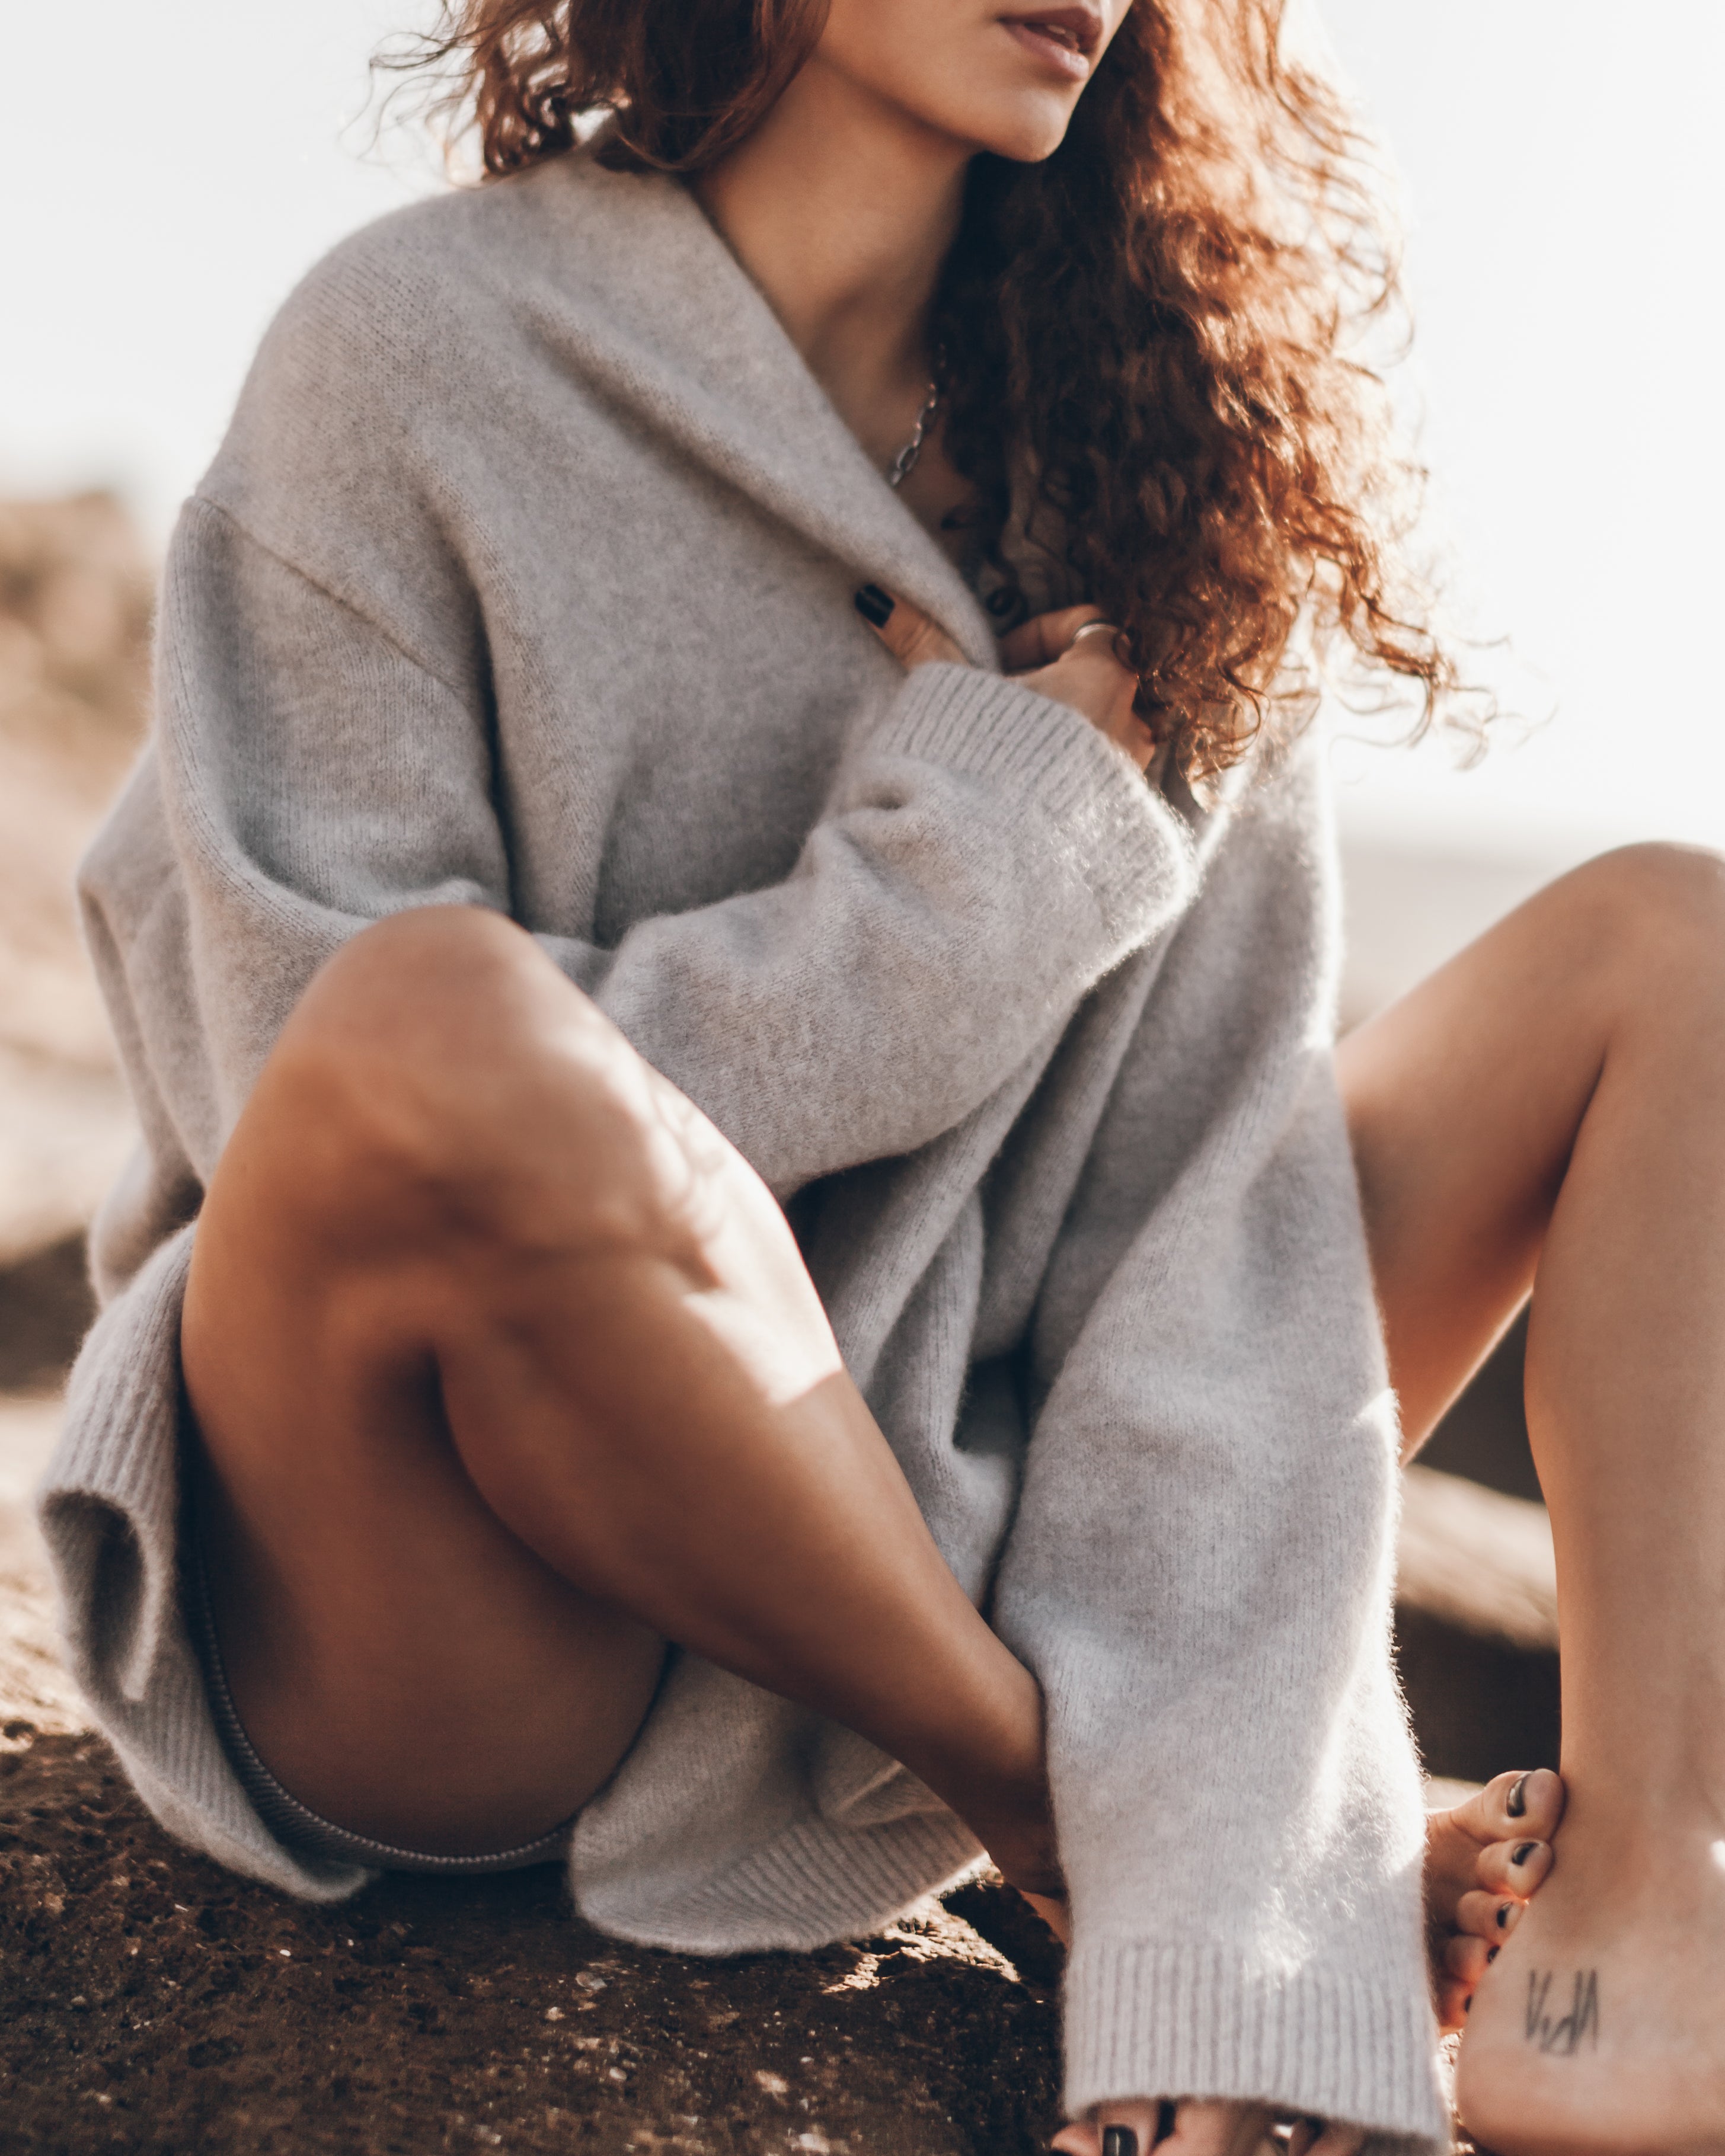 The Grey Oversized Knitted Cardigan